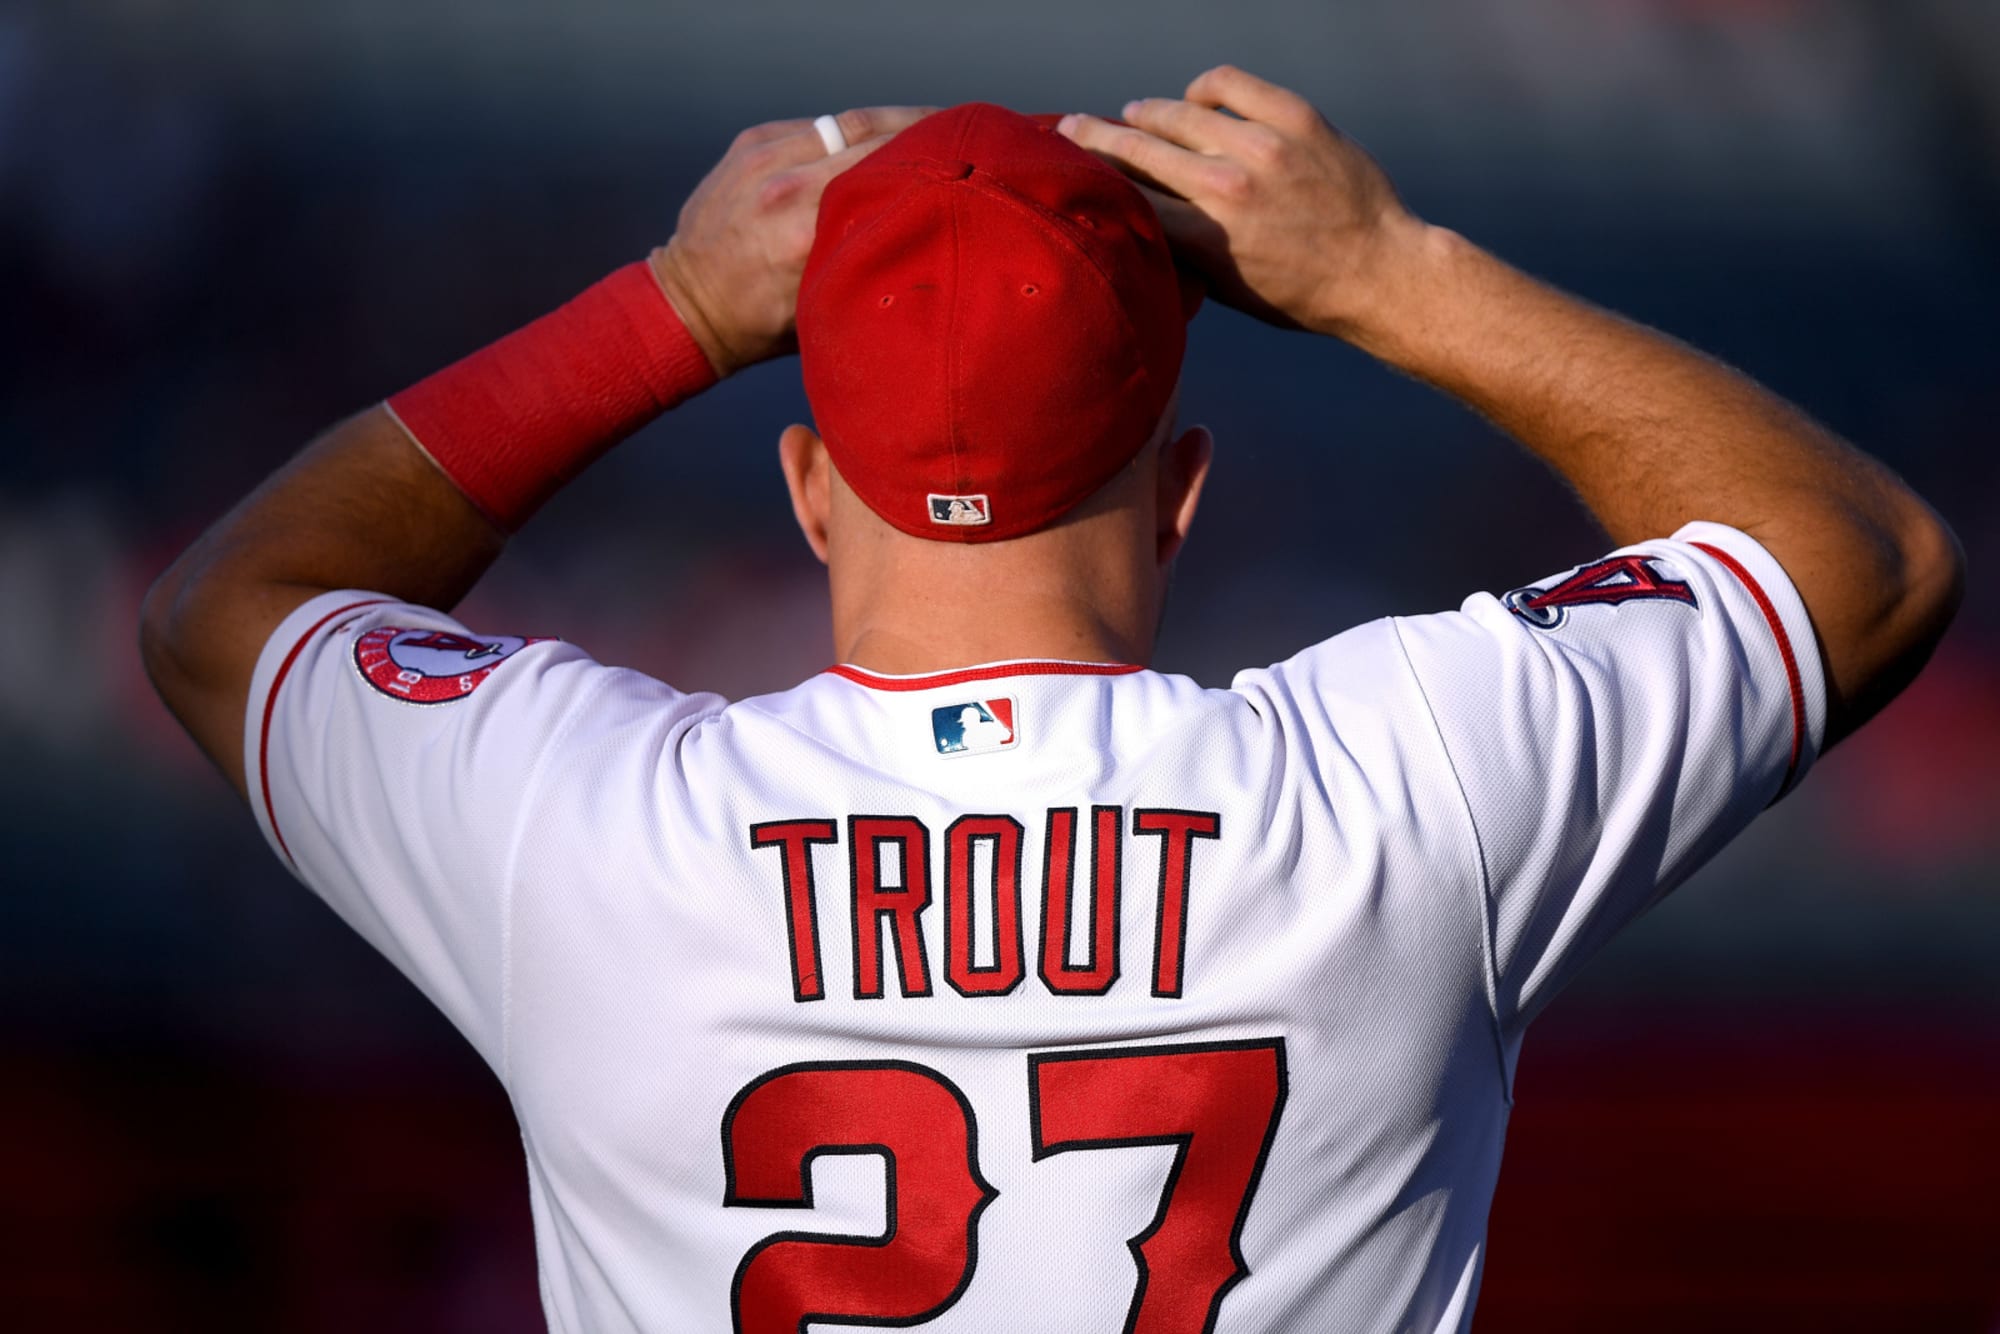 How Mike Trout became the centerpiece of the Angels' epic 2009